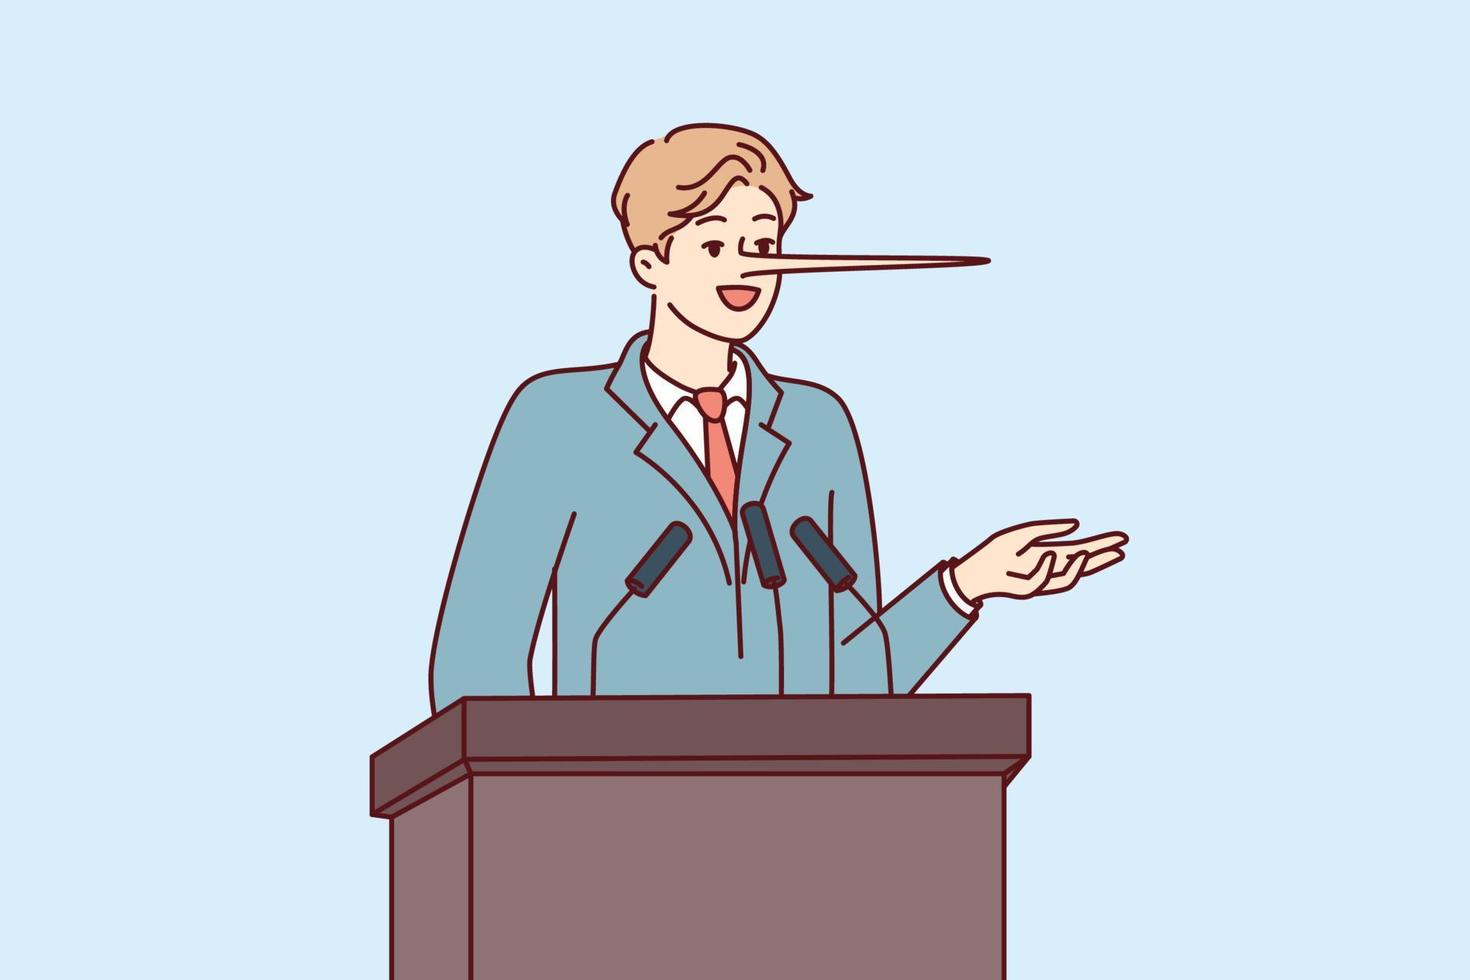 Dishonest man politician with long nose stands behind podium during election campaign. Statesman in business attire makes false and populist statements to potential voters. Flat vector illustration